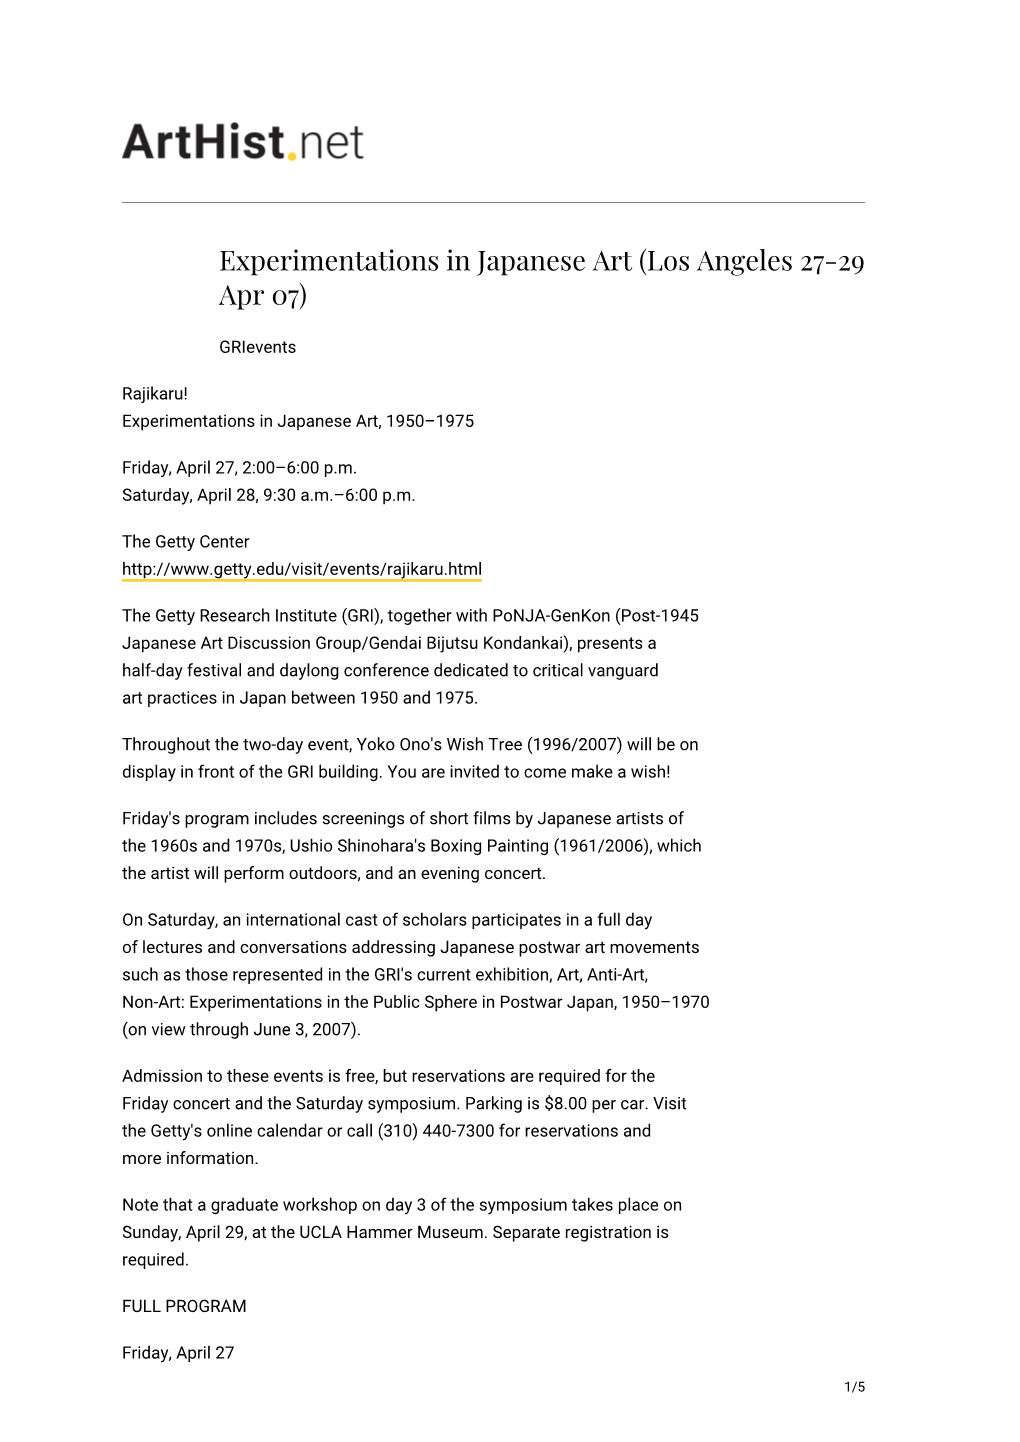 Experimentations in Japanese Art (Los Angeles 27-29 Apr 07)